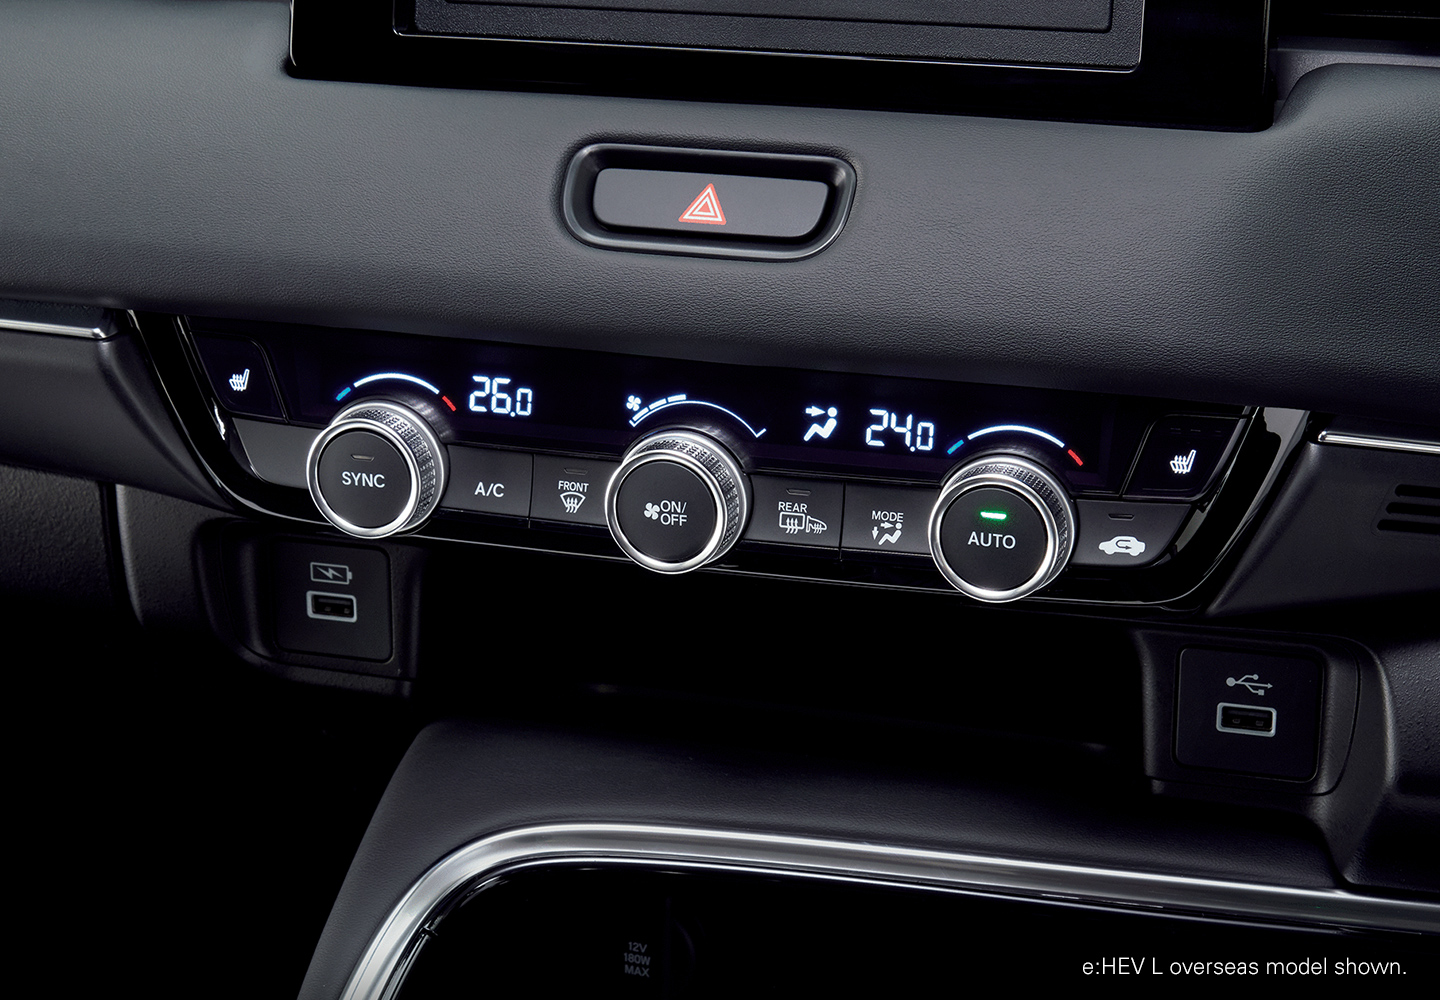 Dual-Zone Climate Control